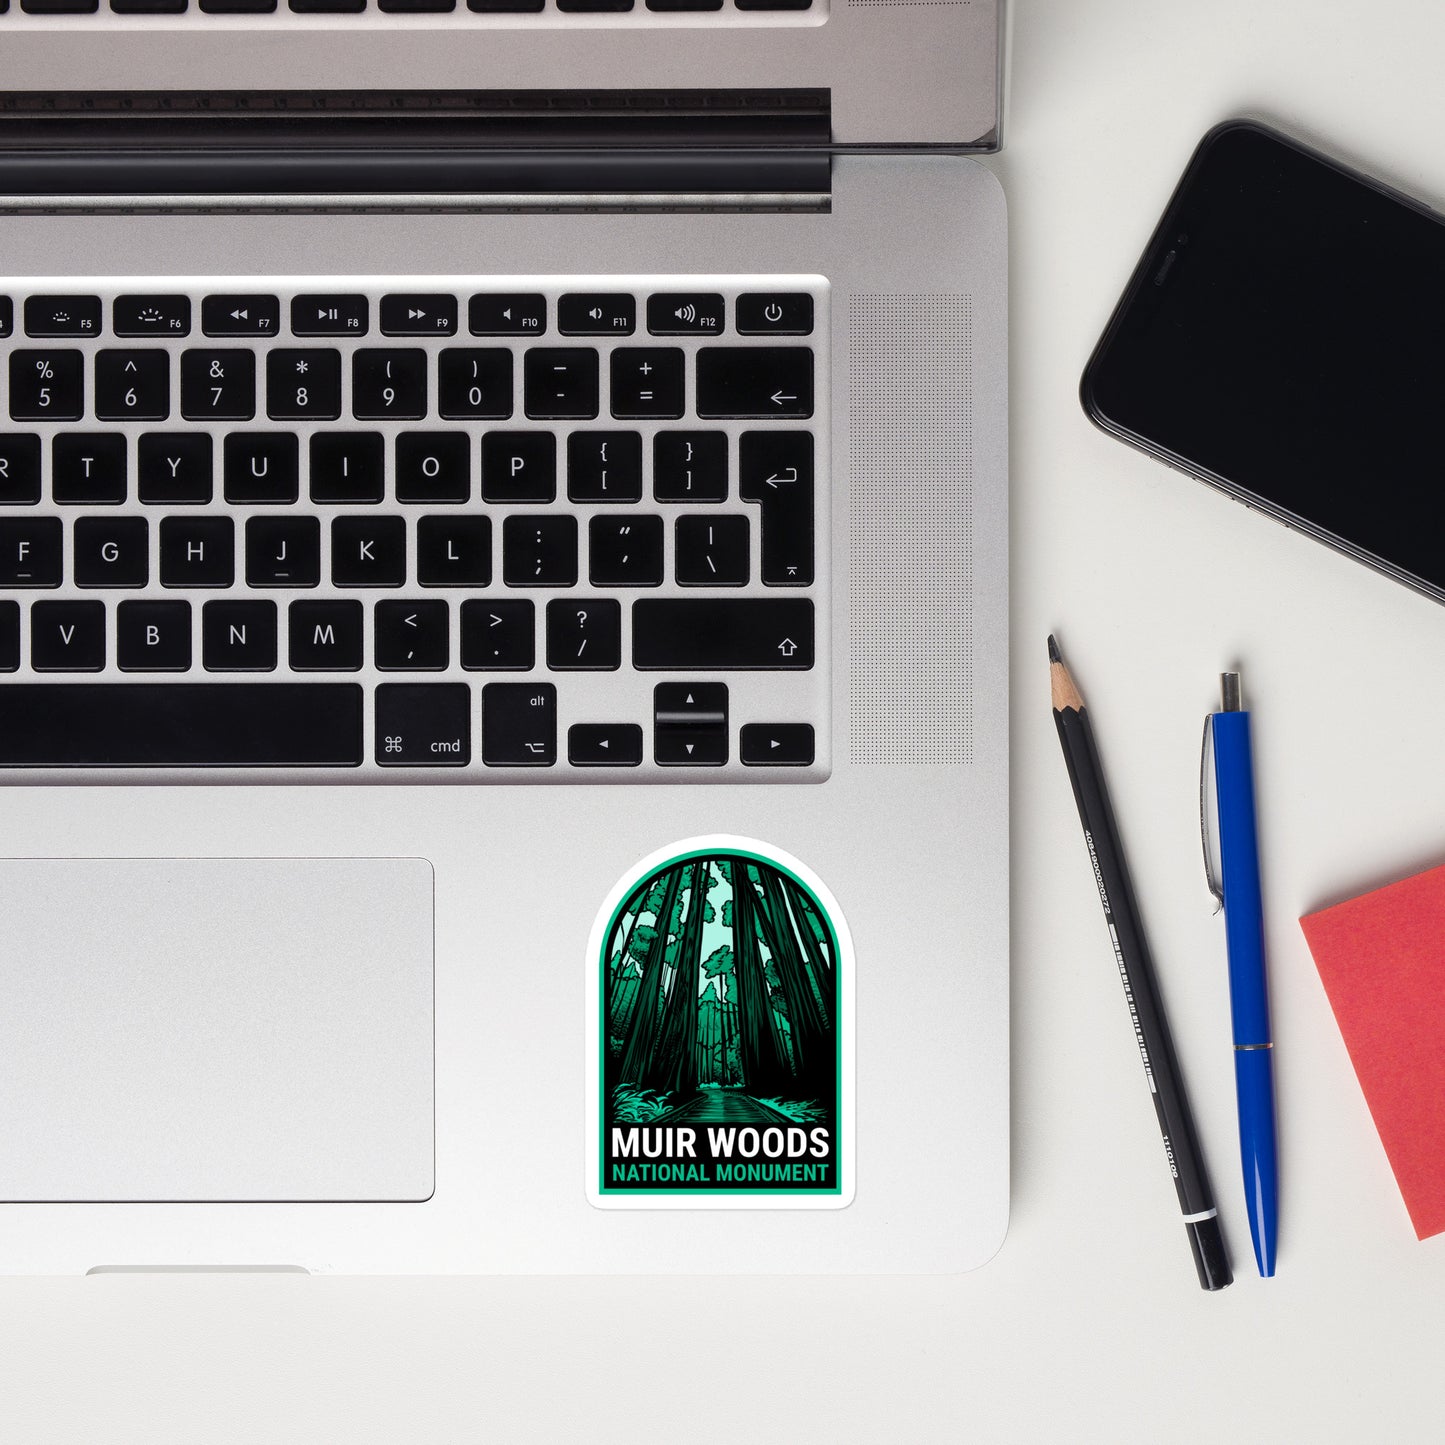 A sticker of Muir Woods National Monument on a laptop